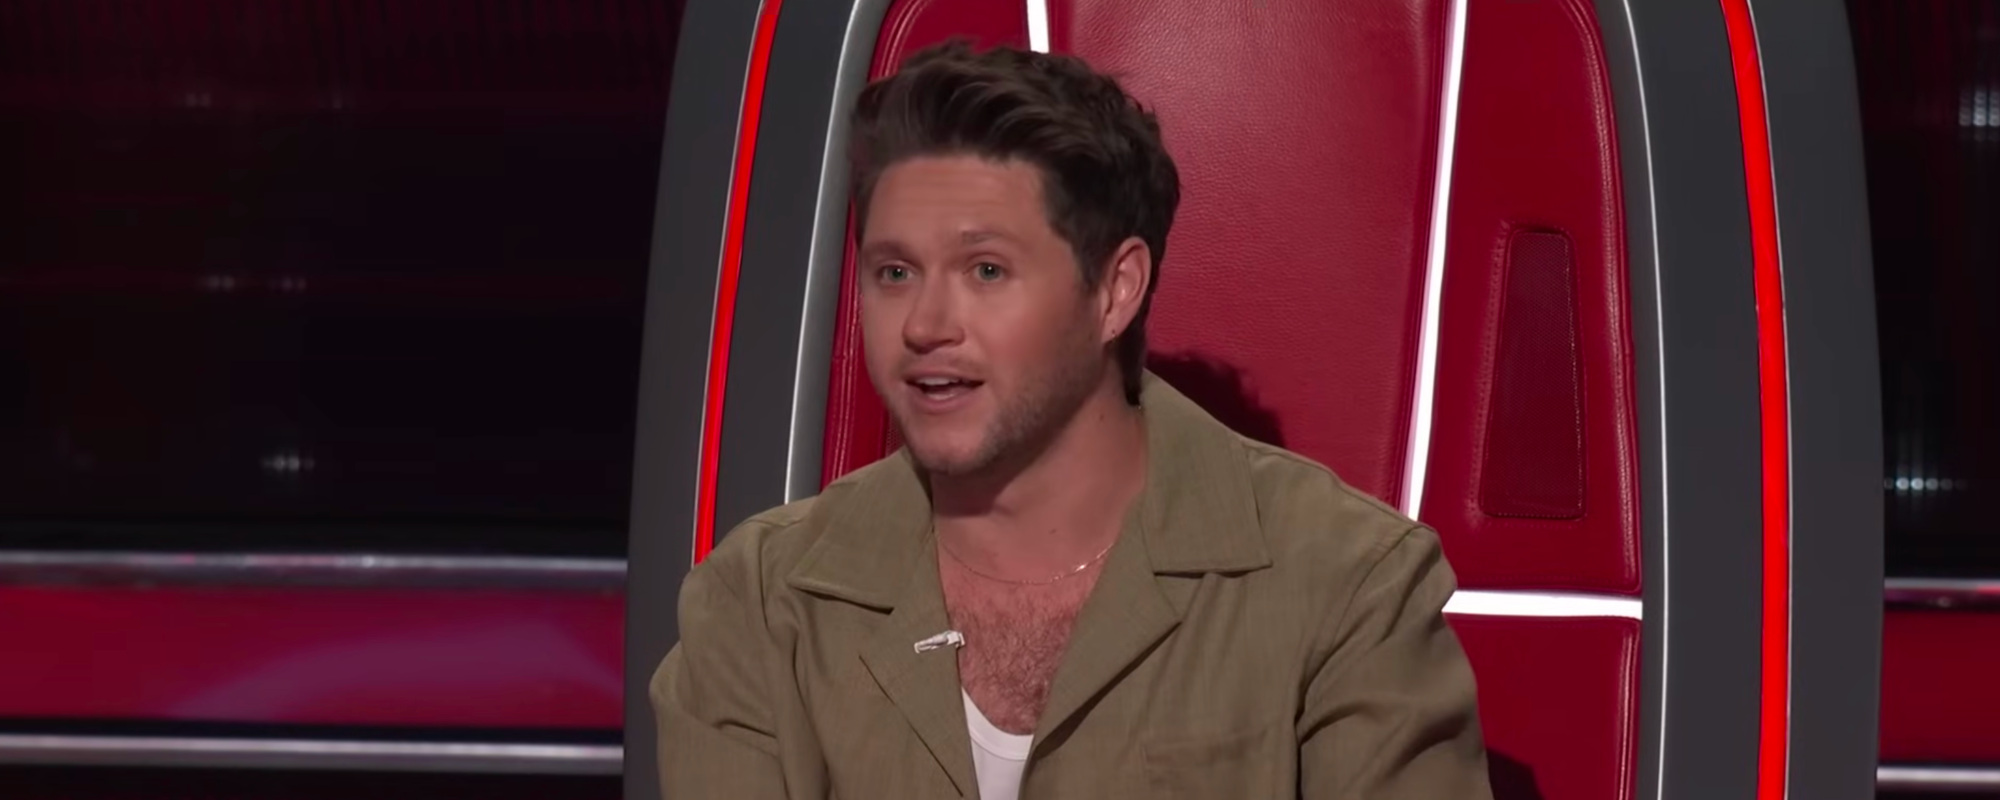 Recap: ‘The Voice’ Shakes Up the Competition in First Night of Playoffs, Team Niall on Chopping Block